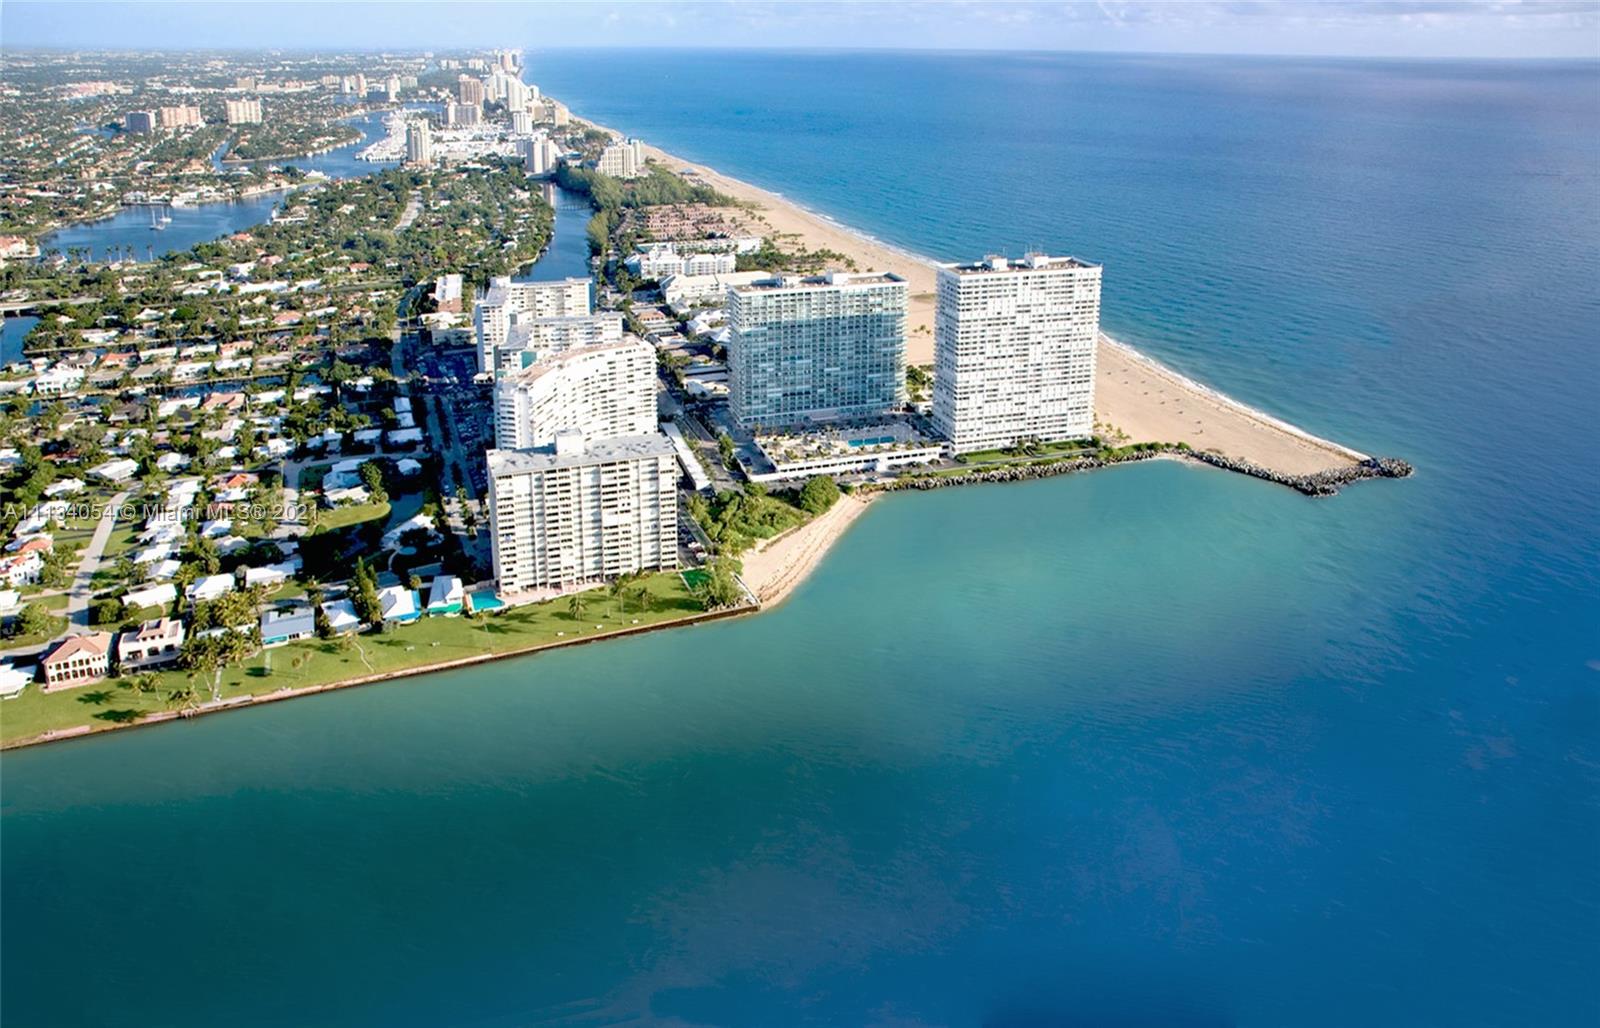 Tastefully furnished and well maintained 2 bedroom/2 bath at prestigious Point of Americas II. Winter 2022-2023 season at $7,000 per month or $6,200 per month for an annual lease.  6 month minimum lease and no pets as per association.  South facing model with spectacular direct inlet, ocean and Intracoastal views. Enjoy the mega yachts and cruise ships passing right outside your windows. Five star resort amenities include 24 hour security, private restaurant, guest suites for resident's guests, fitness center, library, ballroom, lush pools and private beach. Seasonal lease requires full payment of total rent prior to occupancy. **Building currently undergoing exterior concrete restoration and balcony is currently closed due to restoration until September**